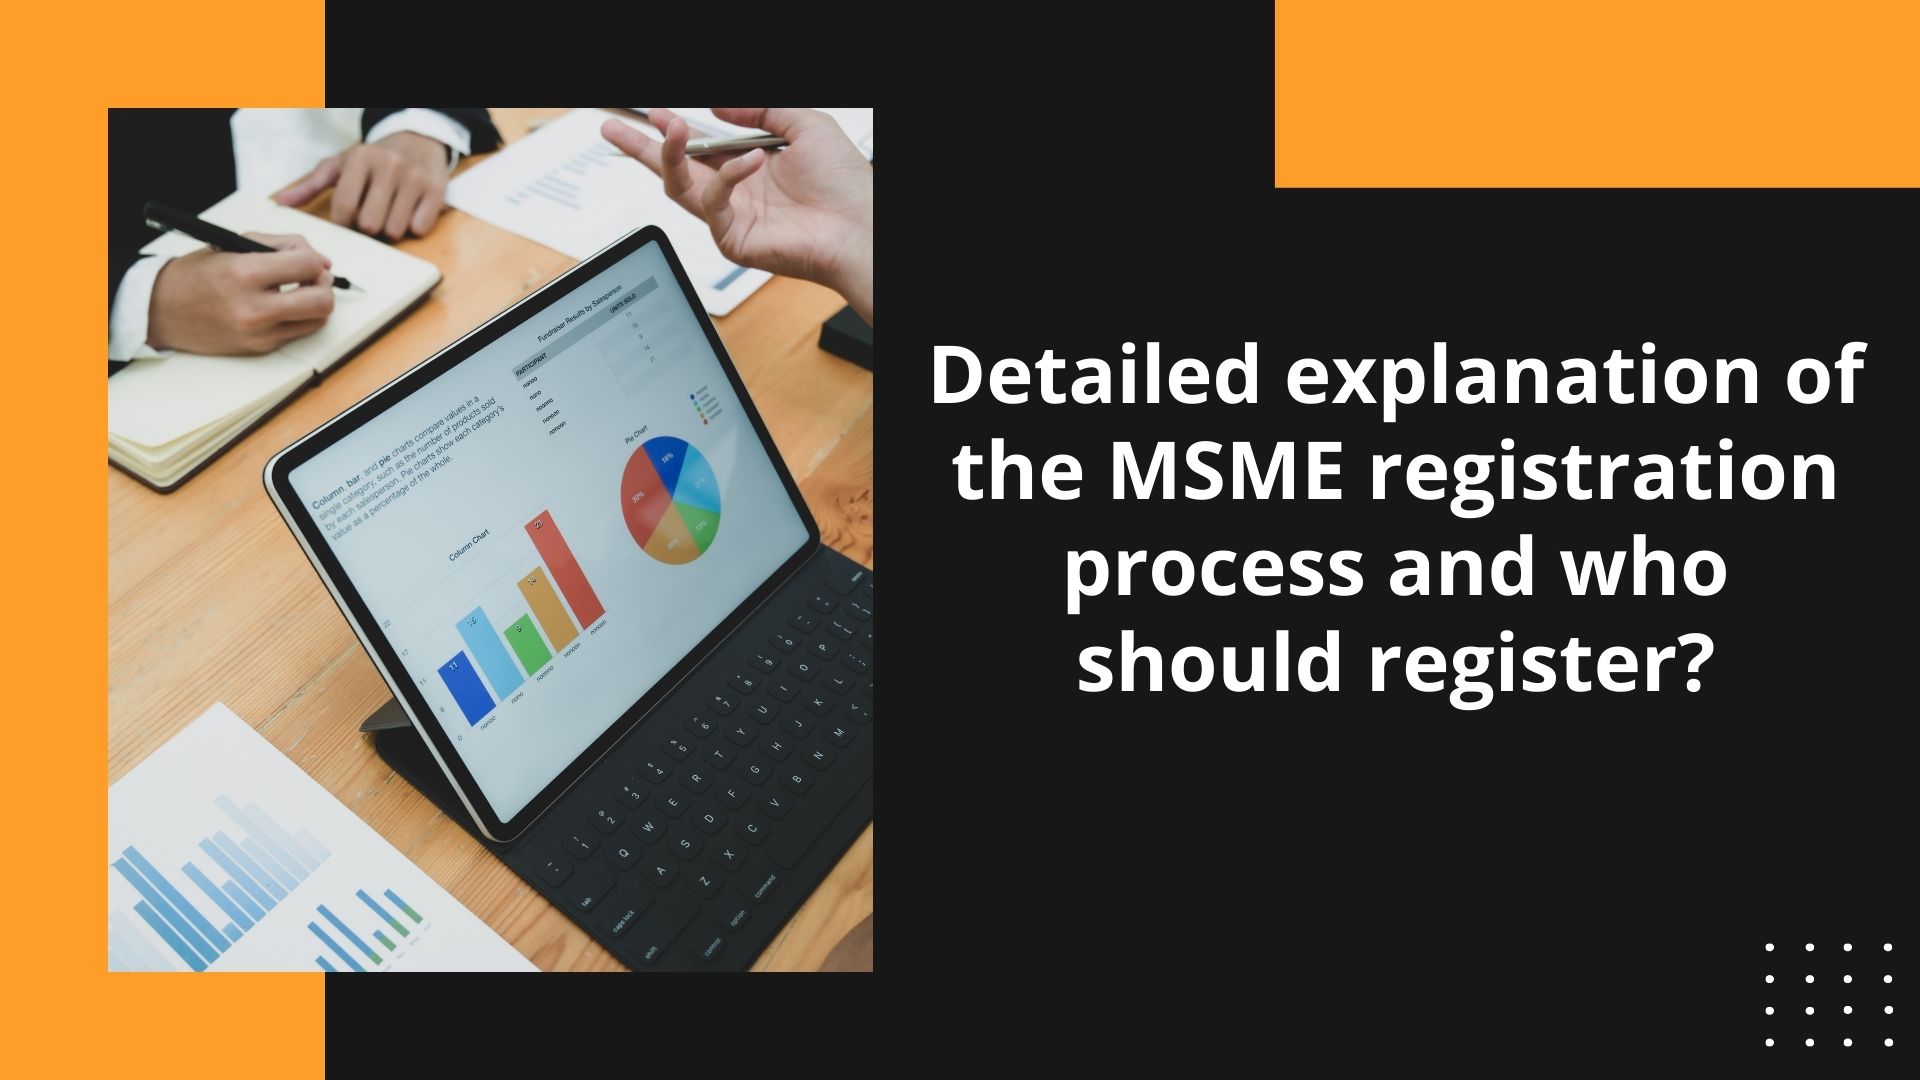 Detailed explanation of the MSME registration process and who should register